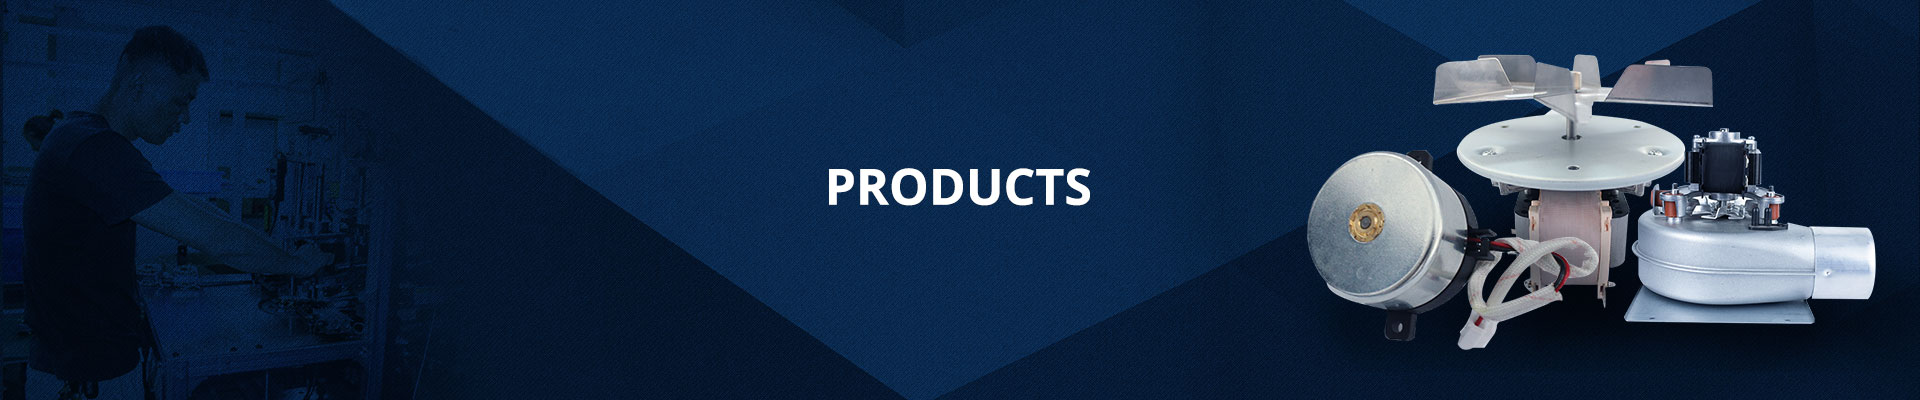 banner-products